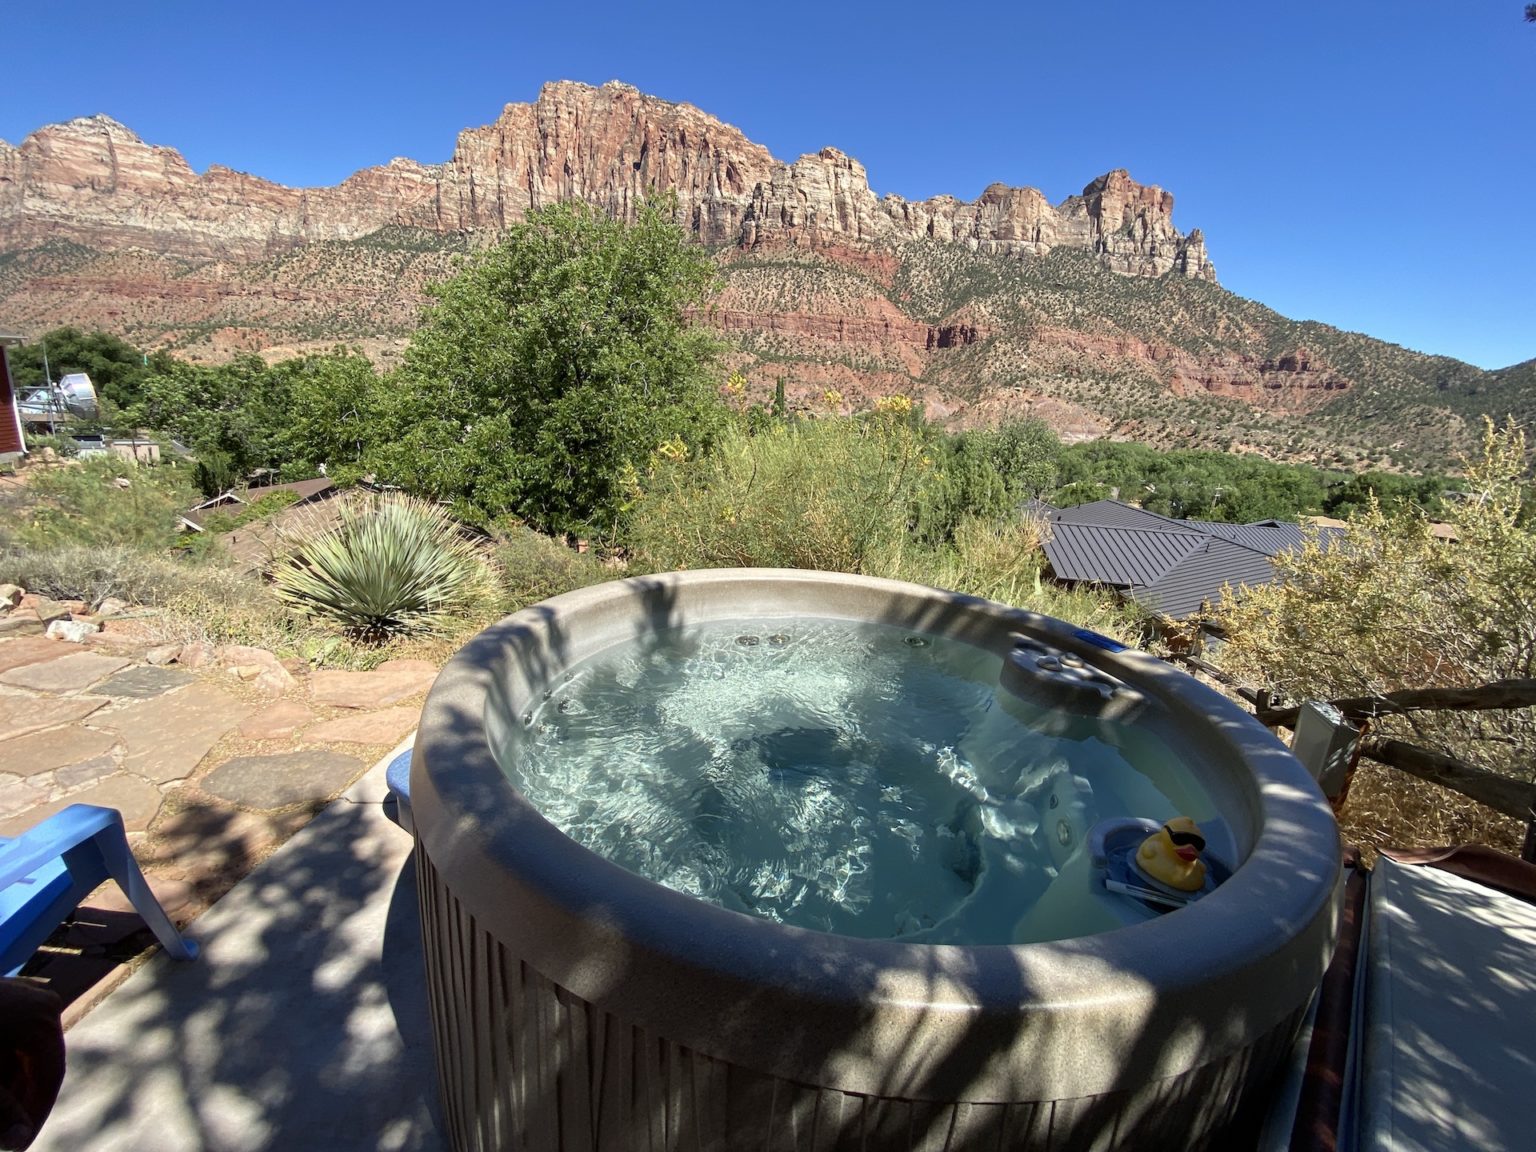 The Best Place To Stay In Zion National Park | Inspire • Travel • Eat